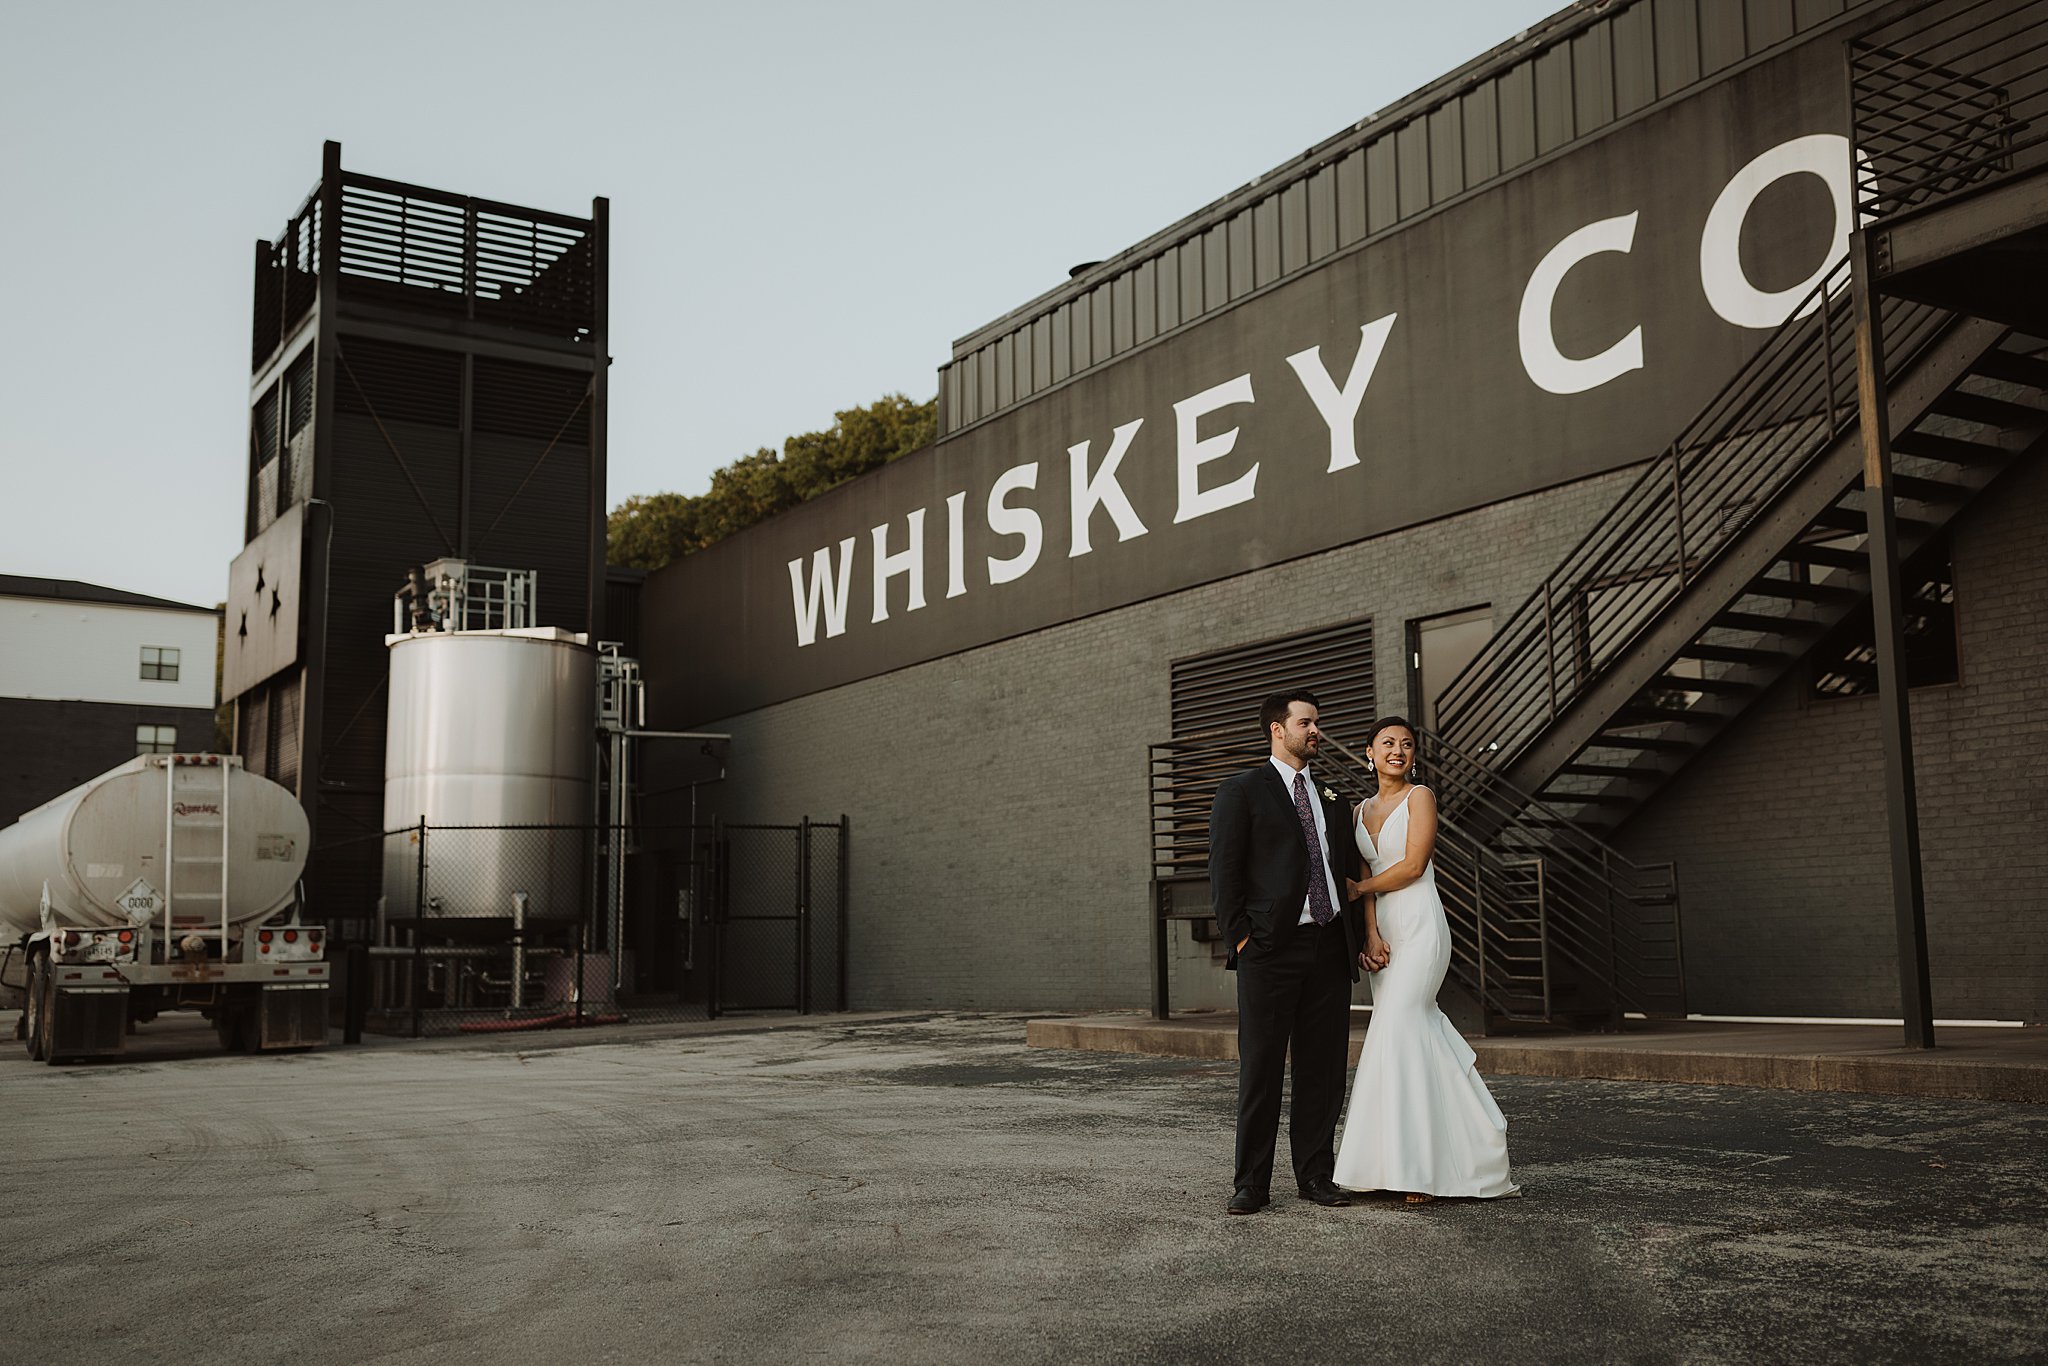 Chattanooga Whisky Event Hall